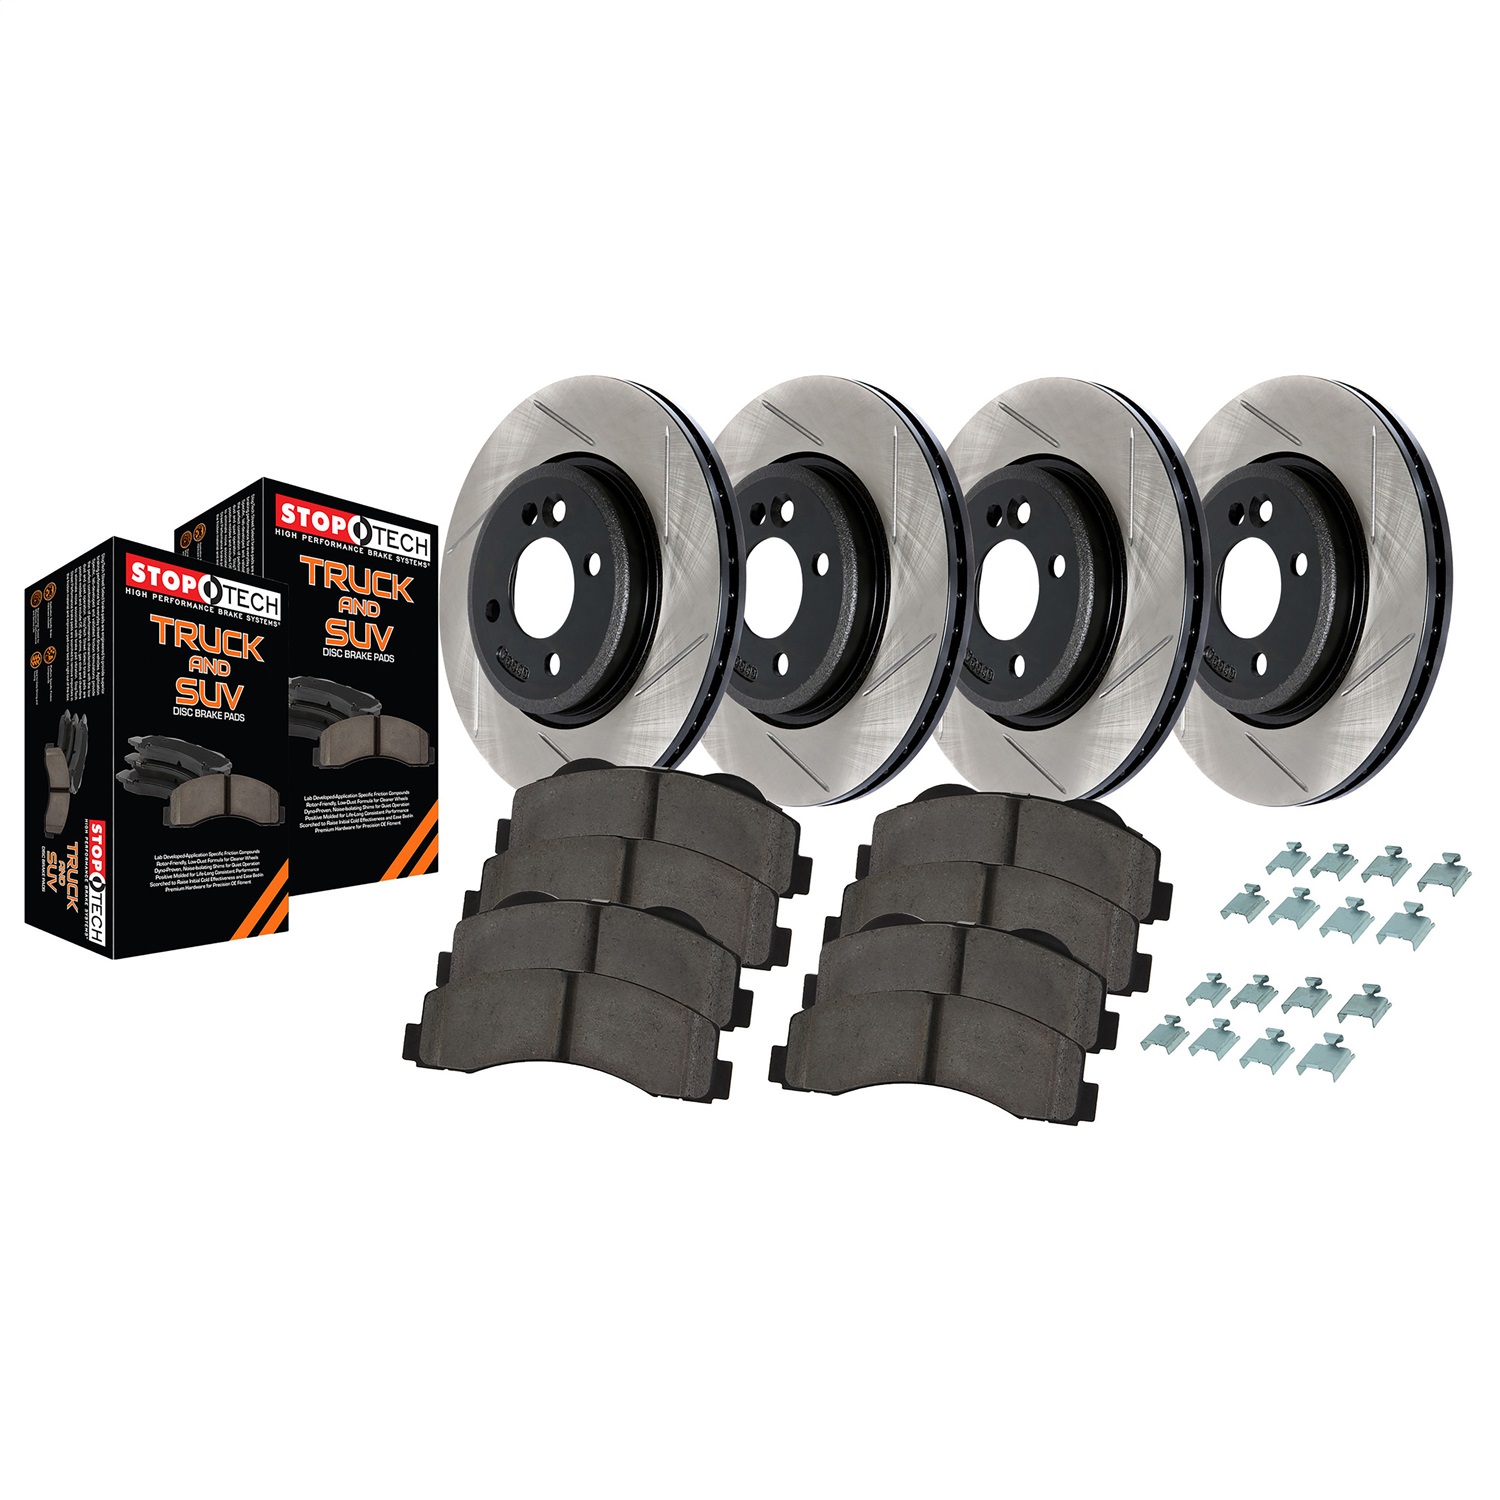 StopTech 967.44059 Truck Performance - 4 Wheel Disc Brake Kit w/Slotted Rotor